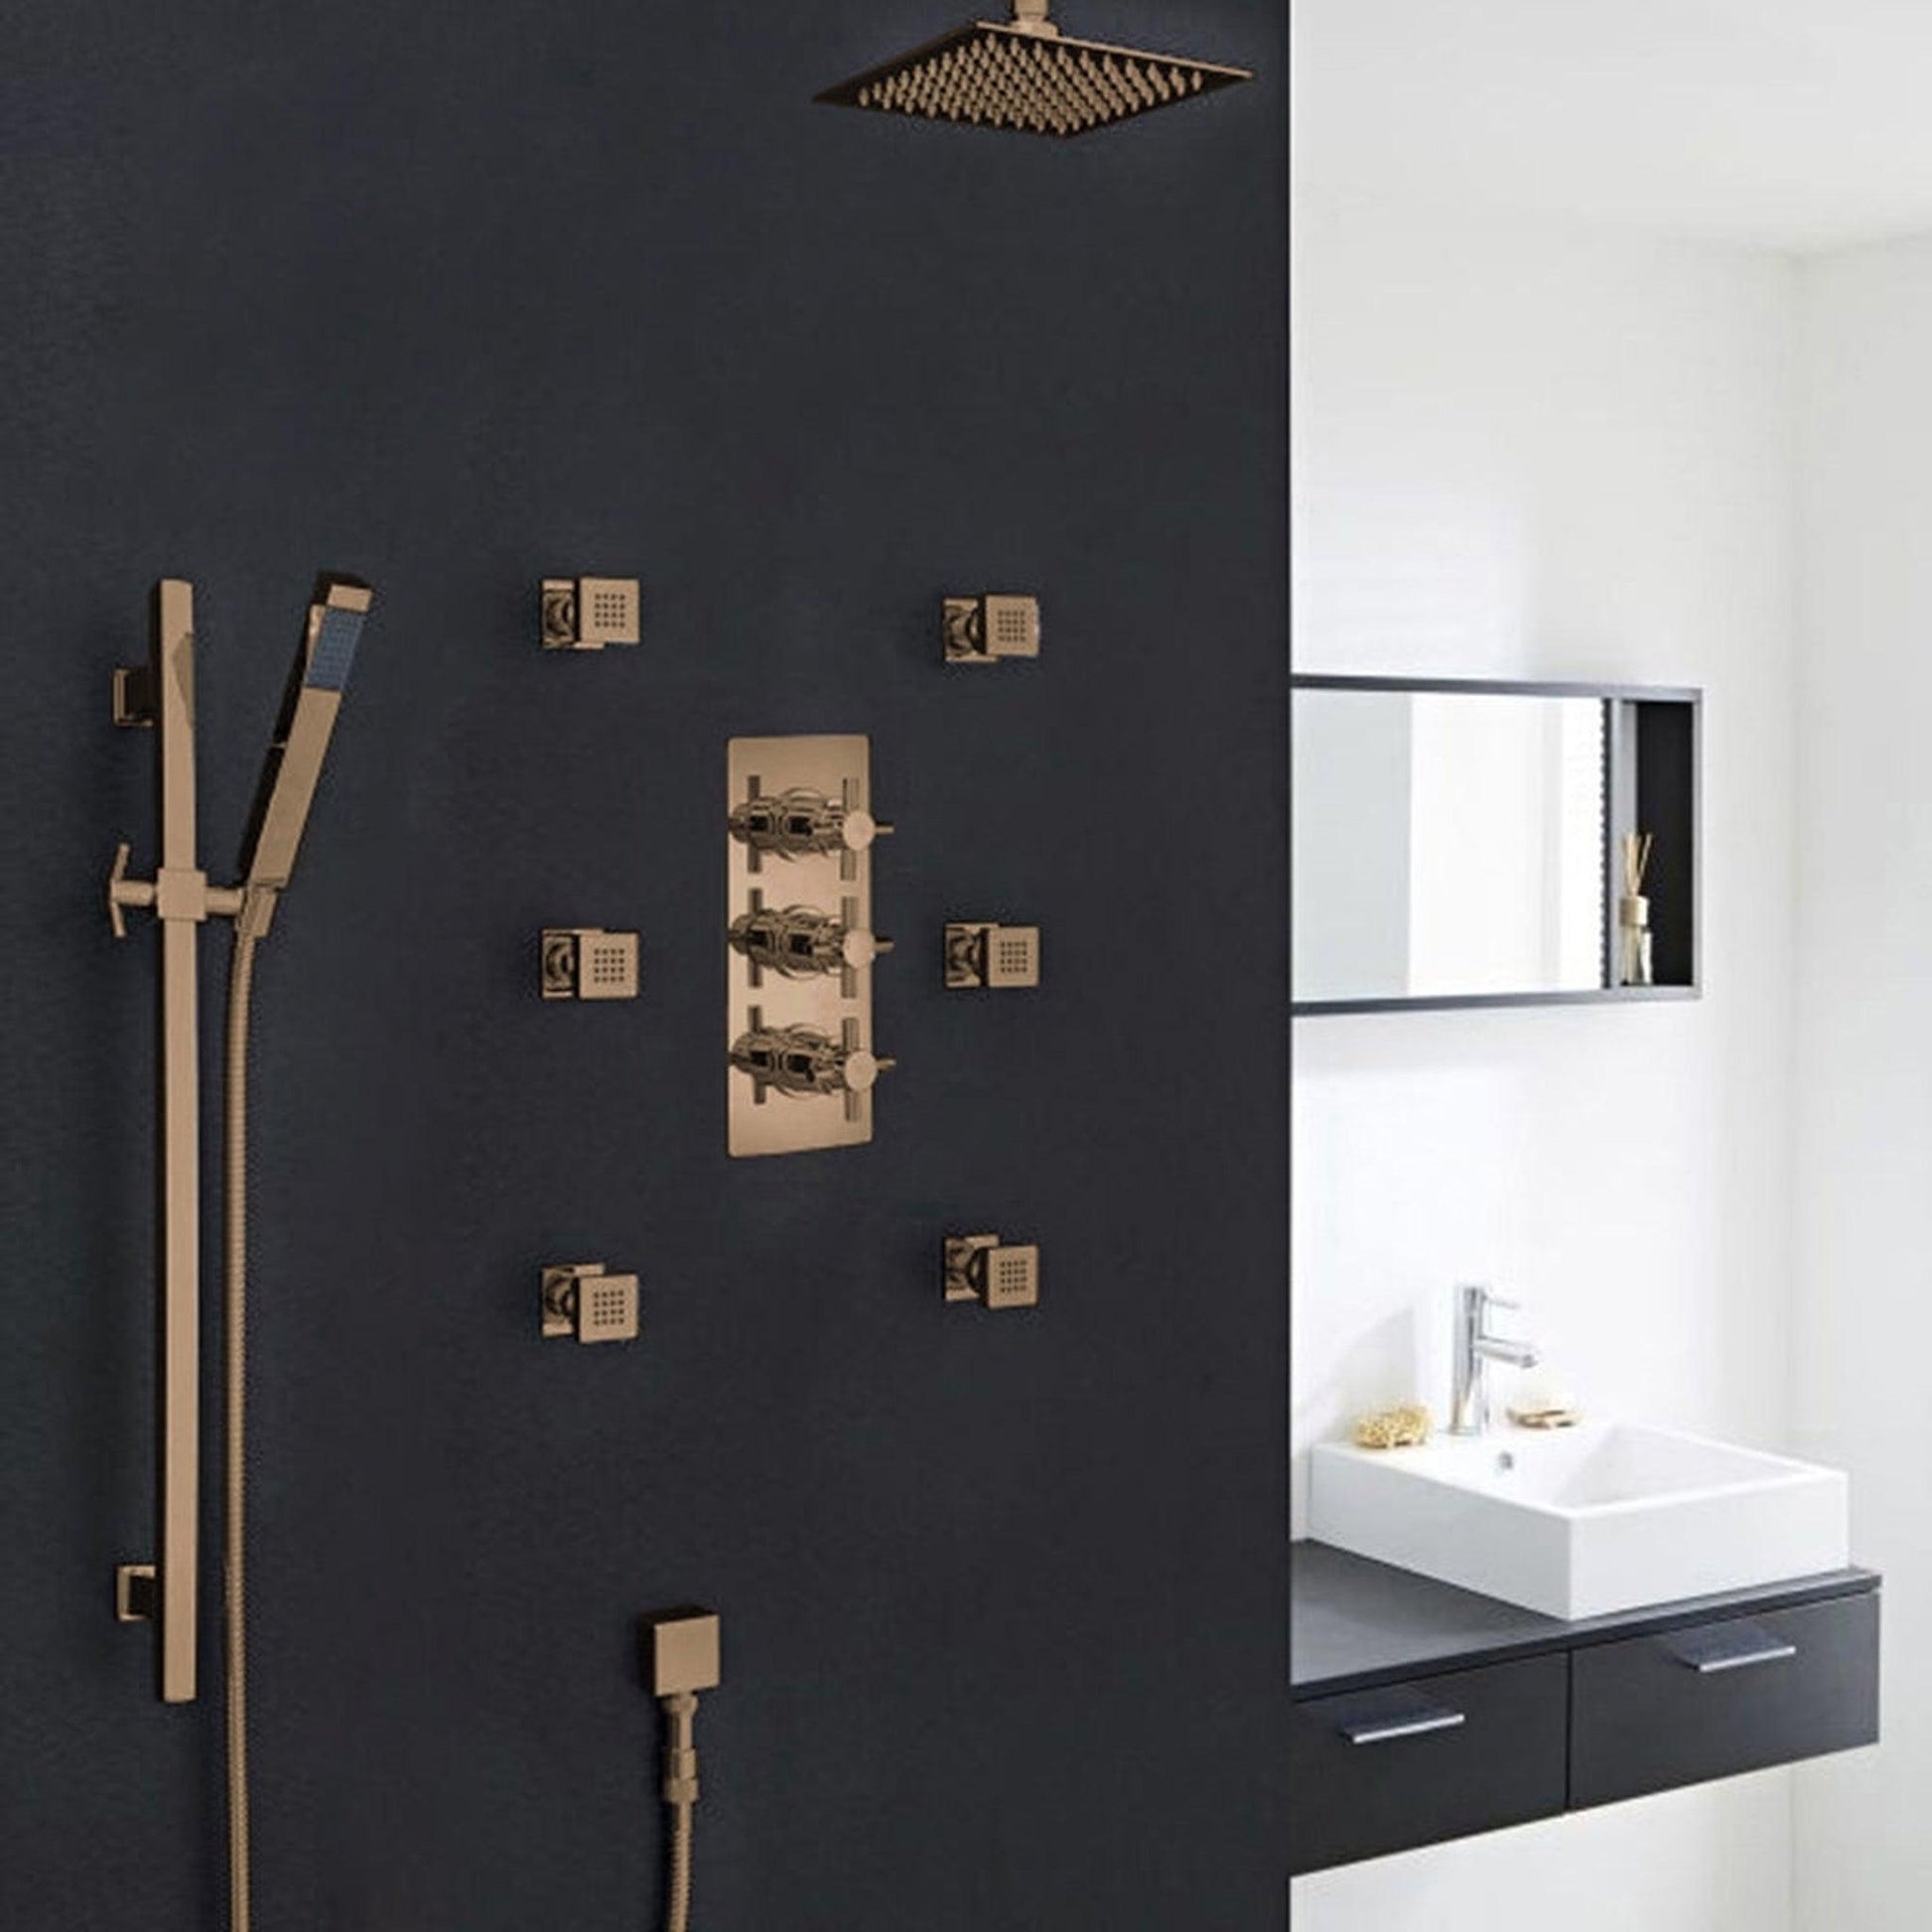 Fontana Reno 12" Oil Rubbed Bronze Round Ceiling Mounted Rainfall Shower System With 6-Body Massage Jets and Hand Shower